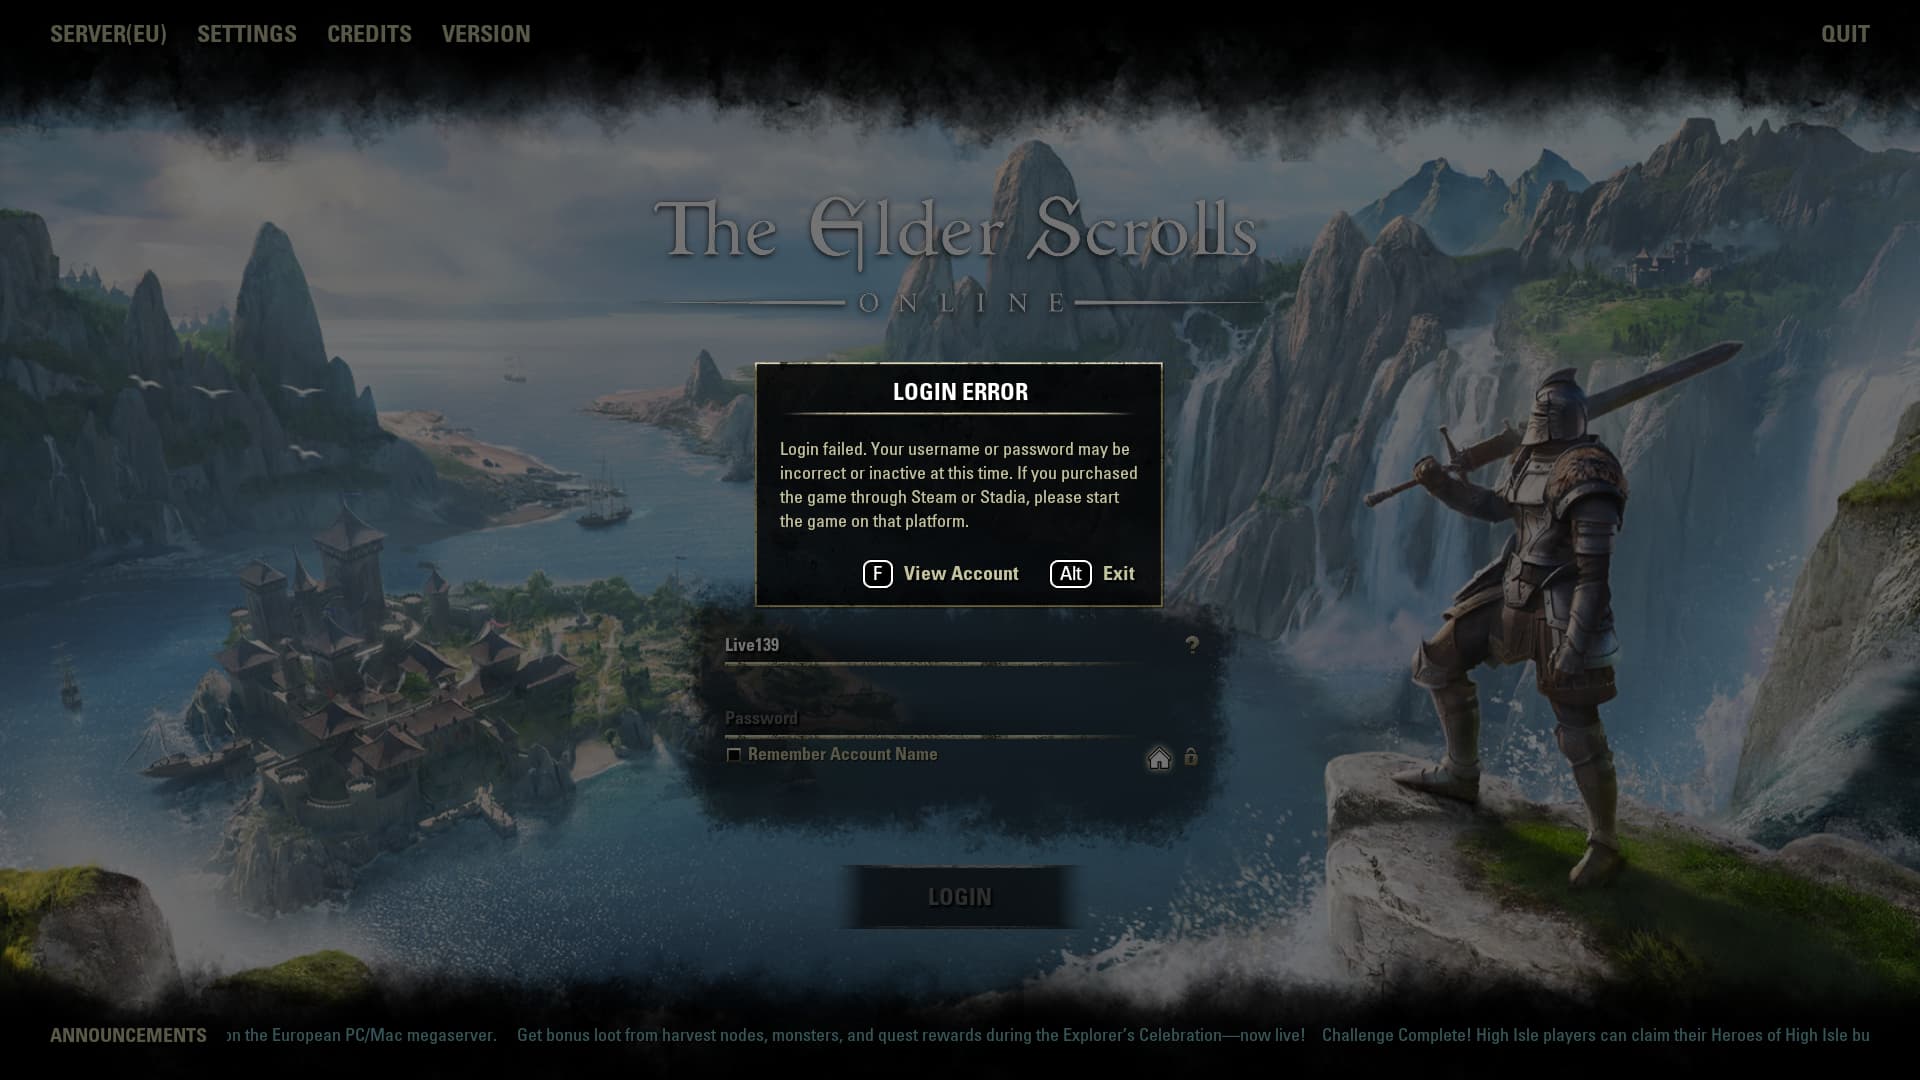 Eso login failed - Support - Lutris Forums